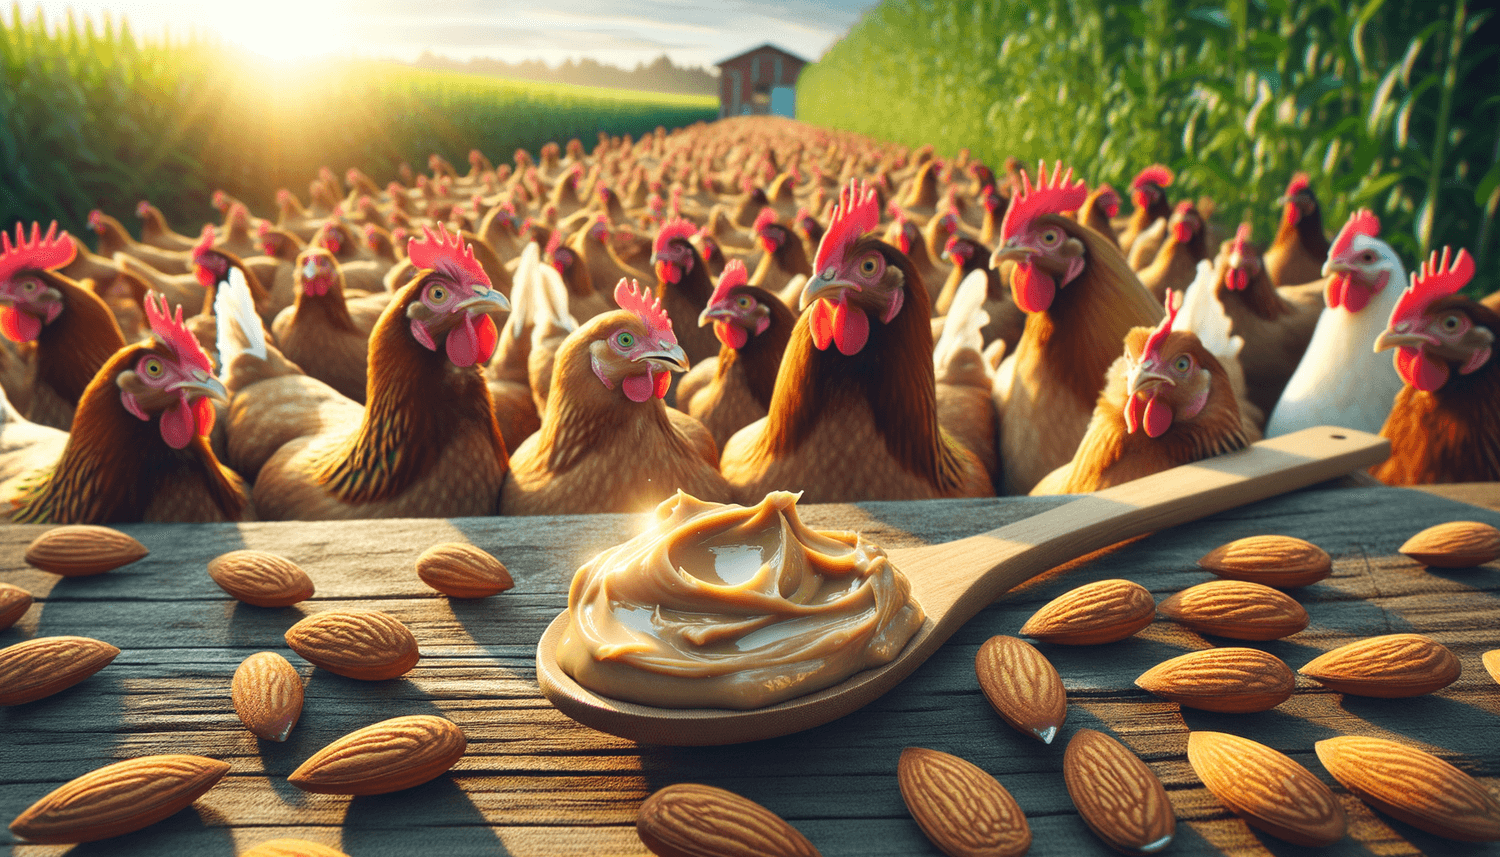 Can Chickens Eat Almond Butter?